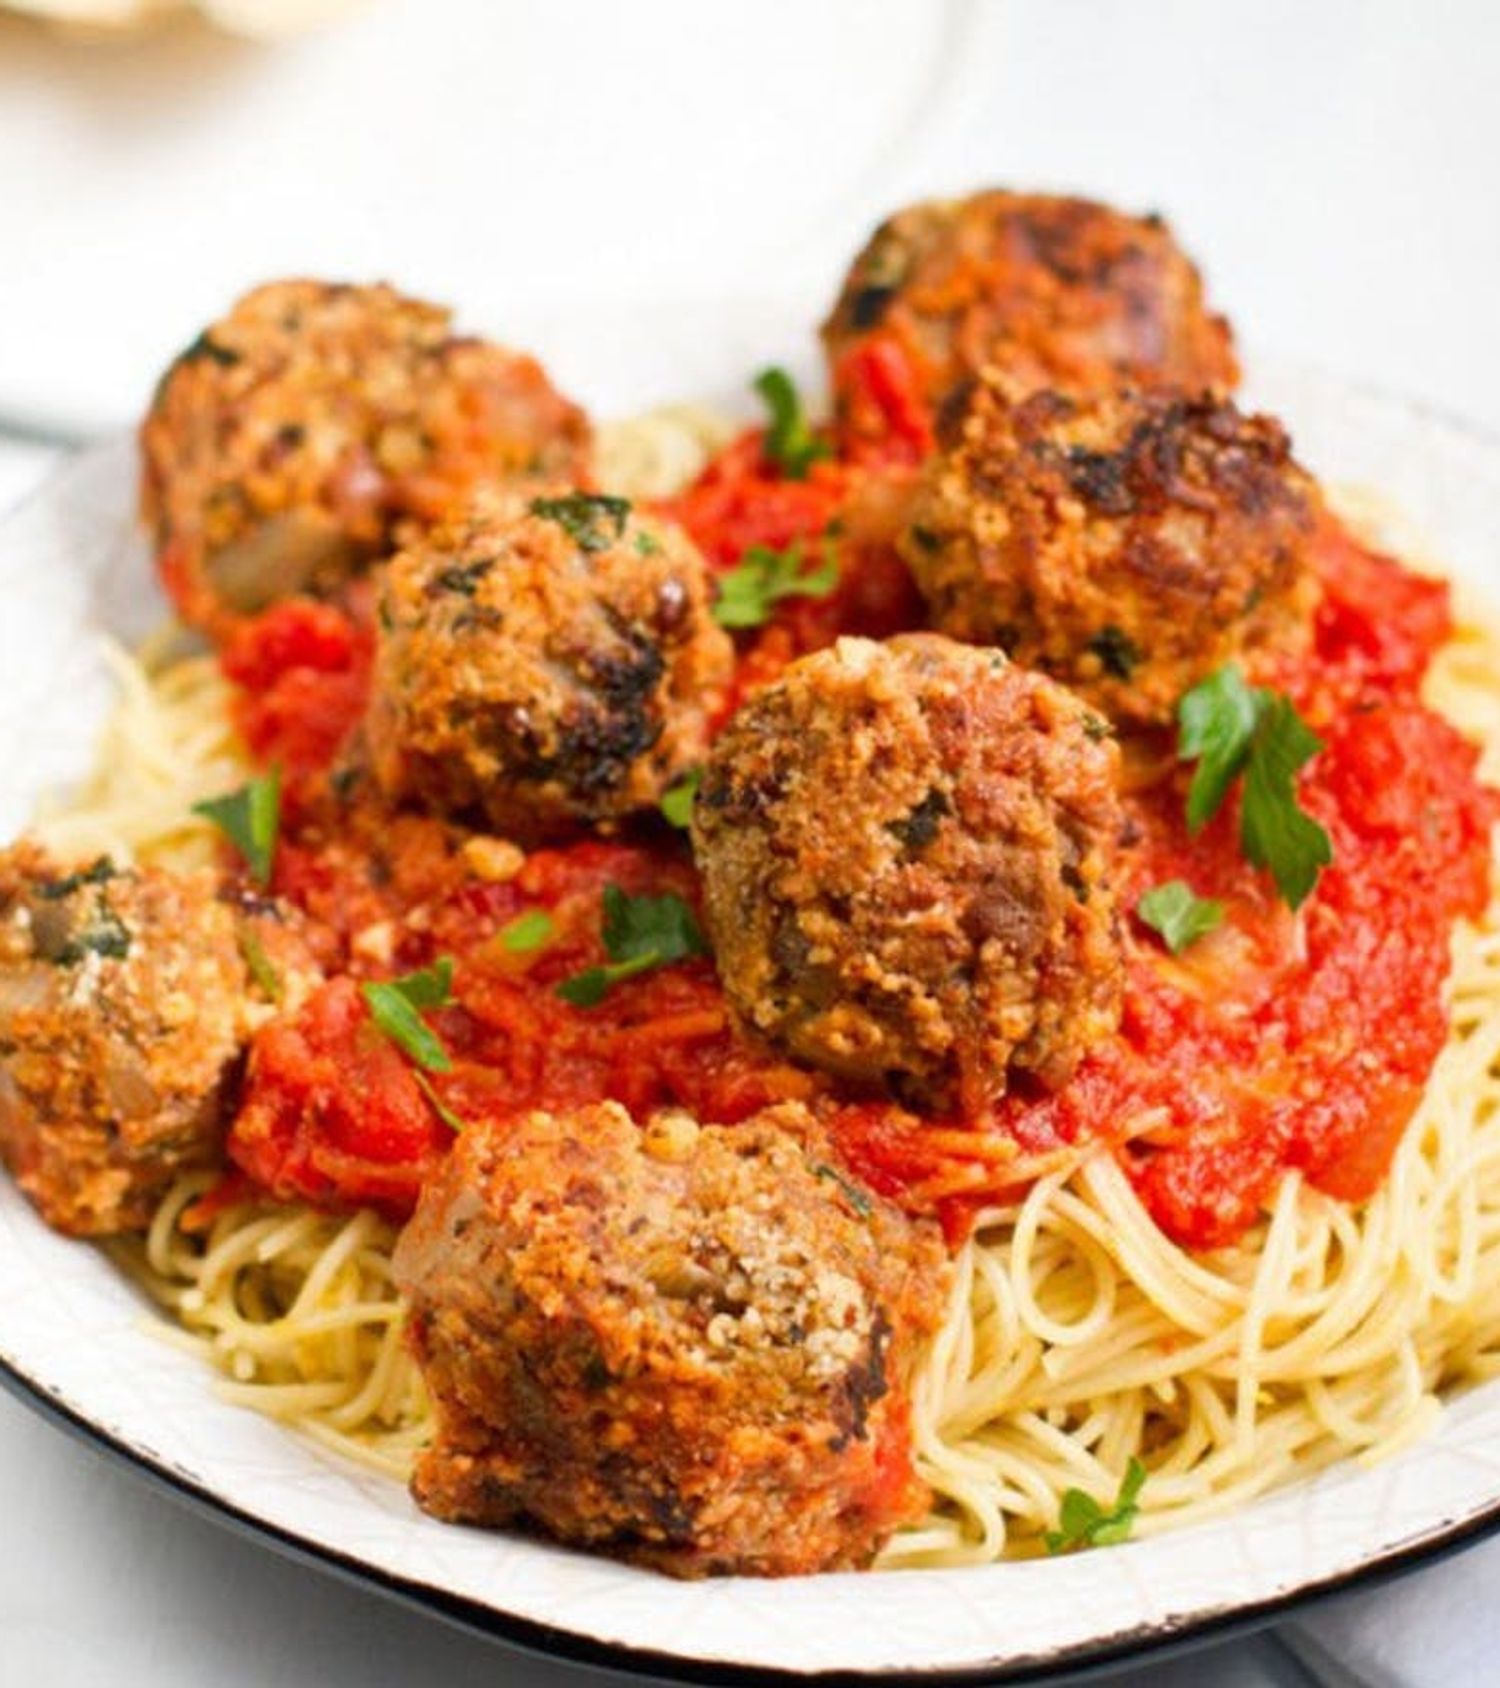 15 Tasty Vegetarian Versions of Classic Meat Dishes